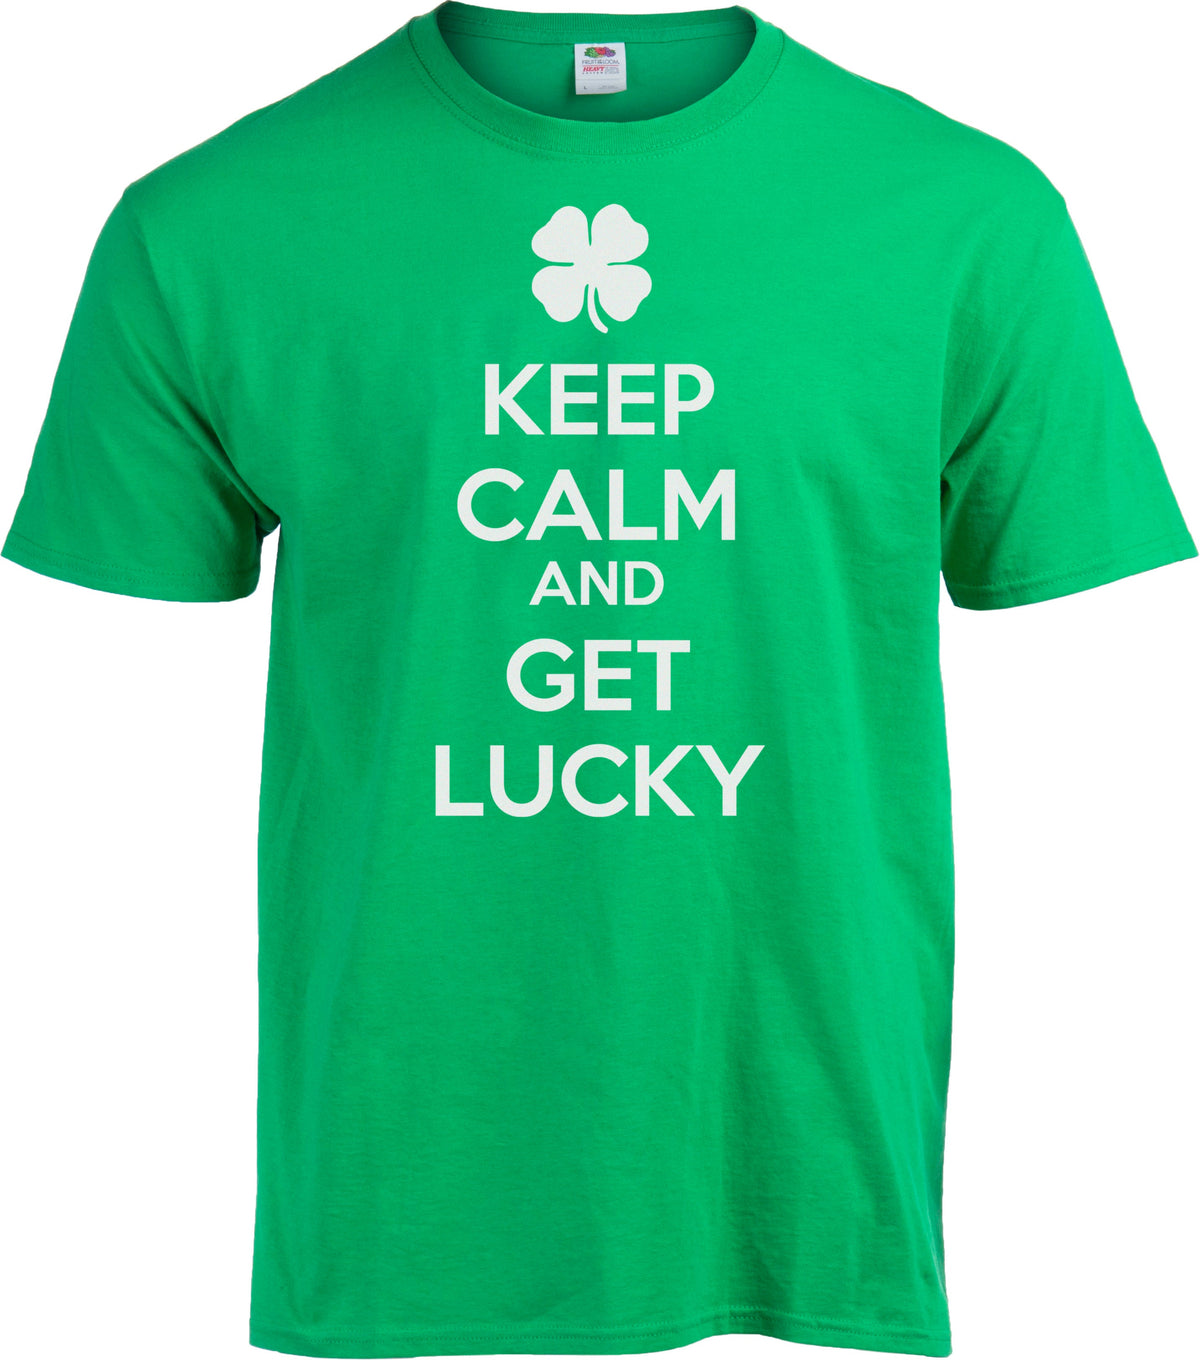 Keep Calm And Get Lucky - St. Patrick's Day Good Luck Funny T-shirt - Men's/Unisex